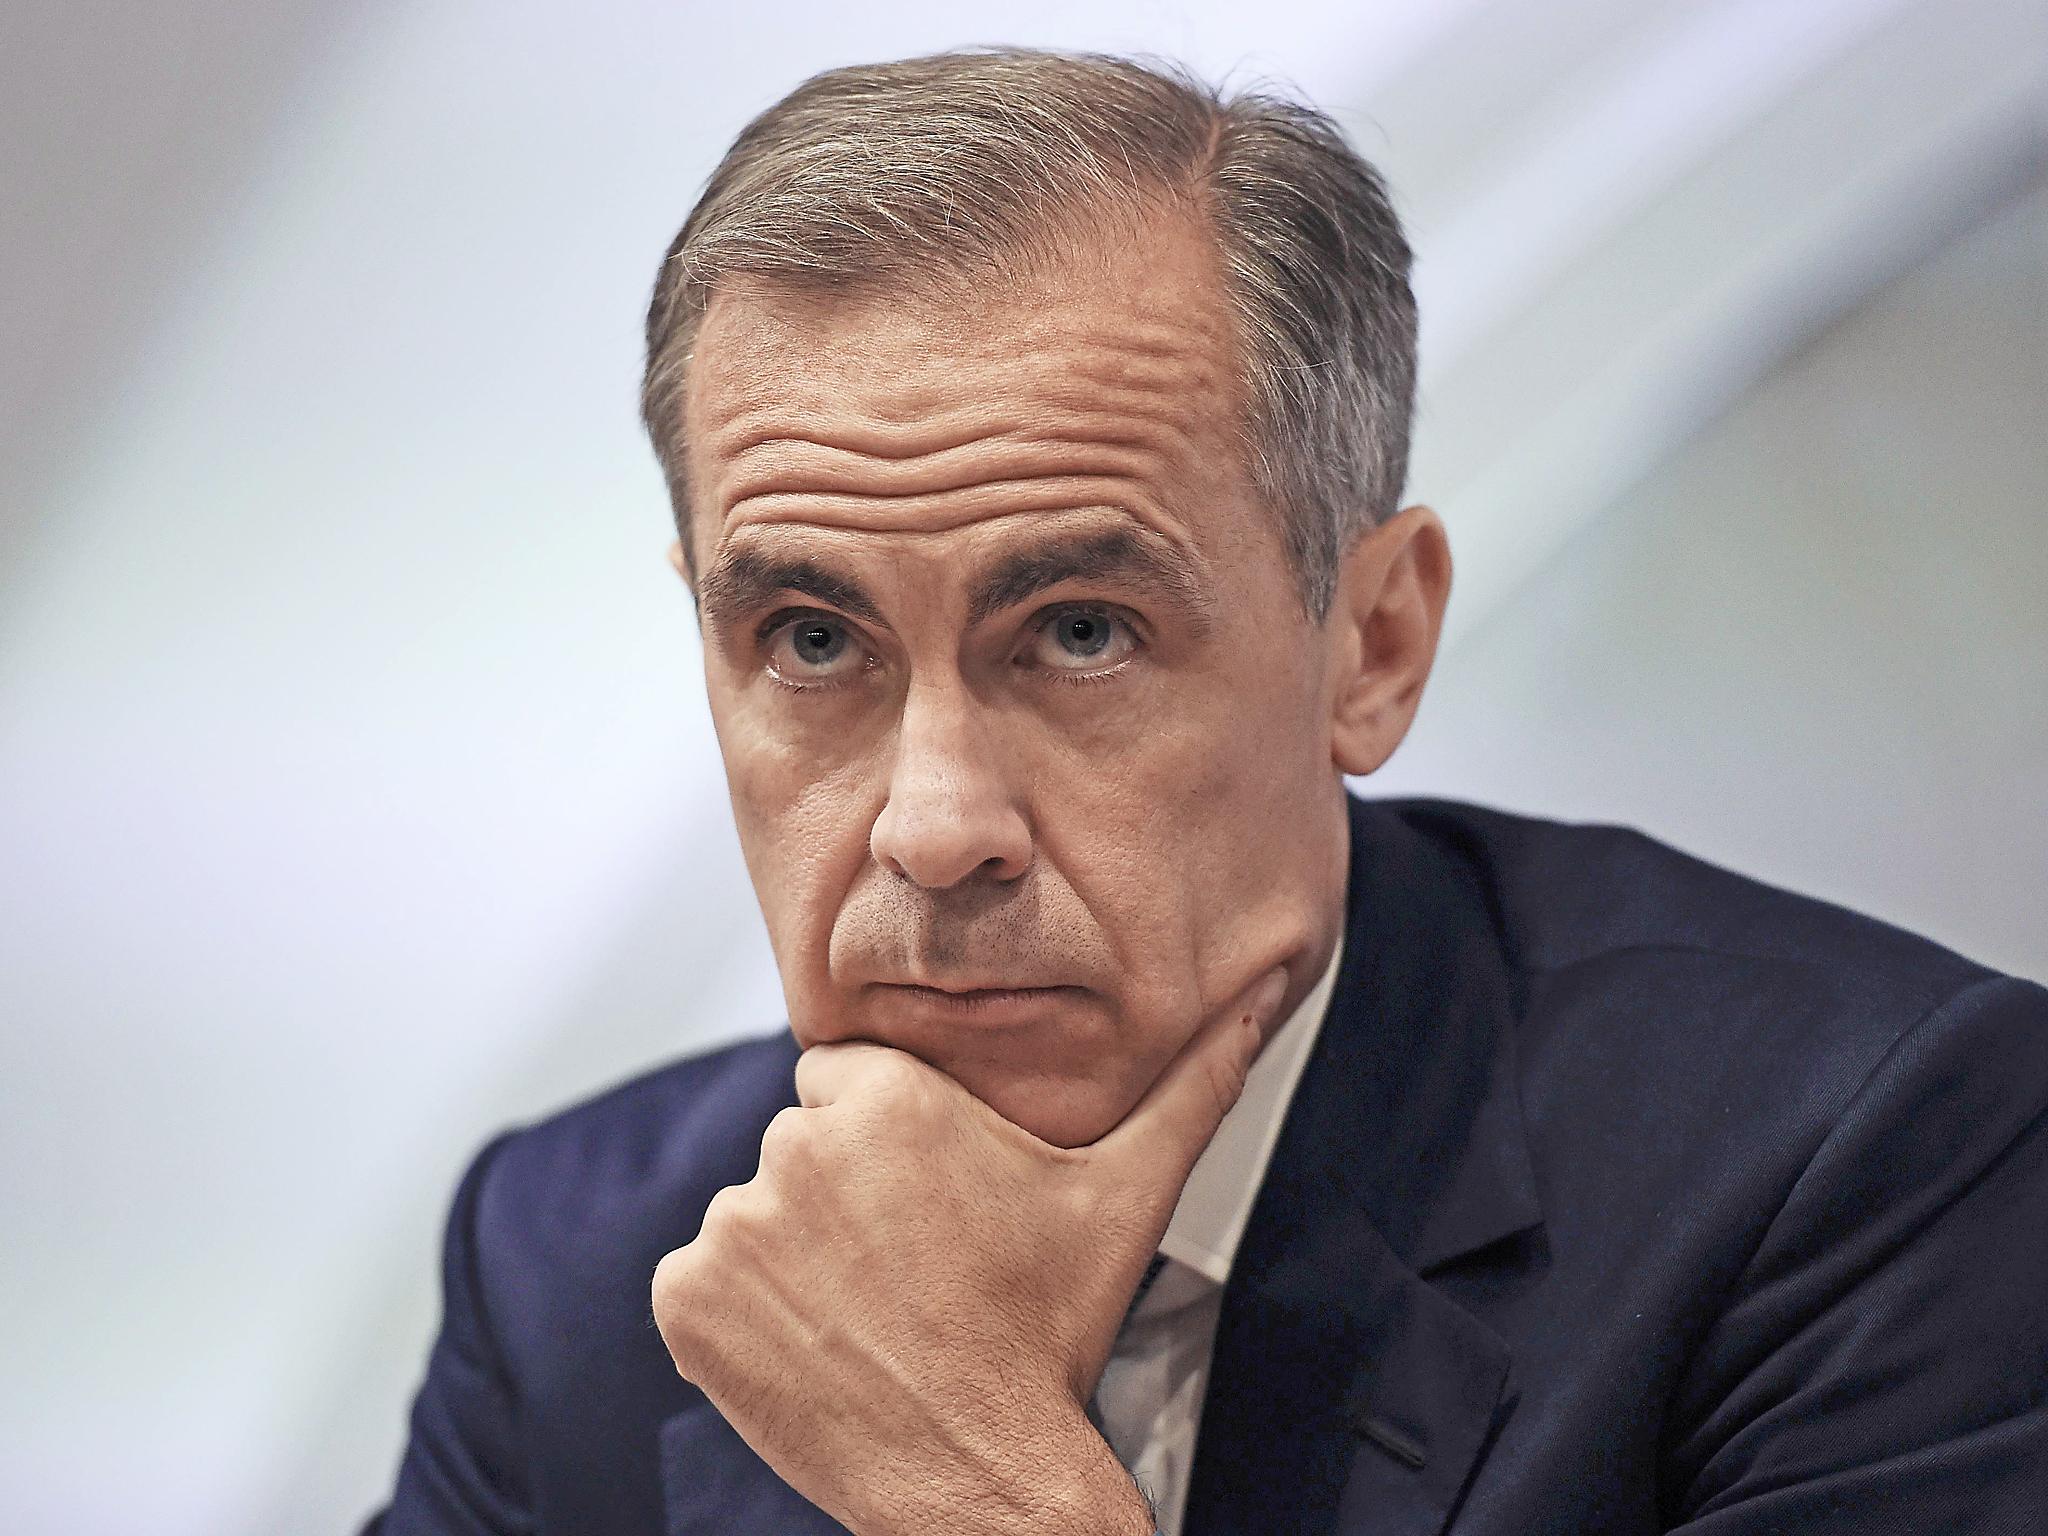 ‘We care a lot about distribution but we are not a political entity,’ said Mark Carney